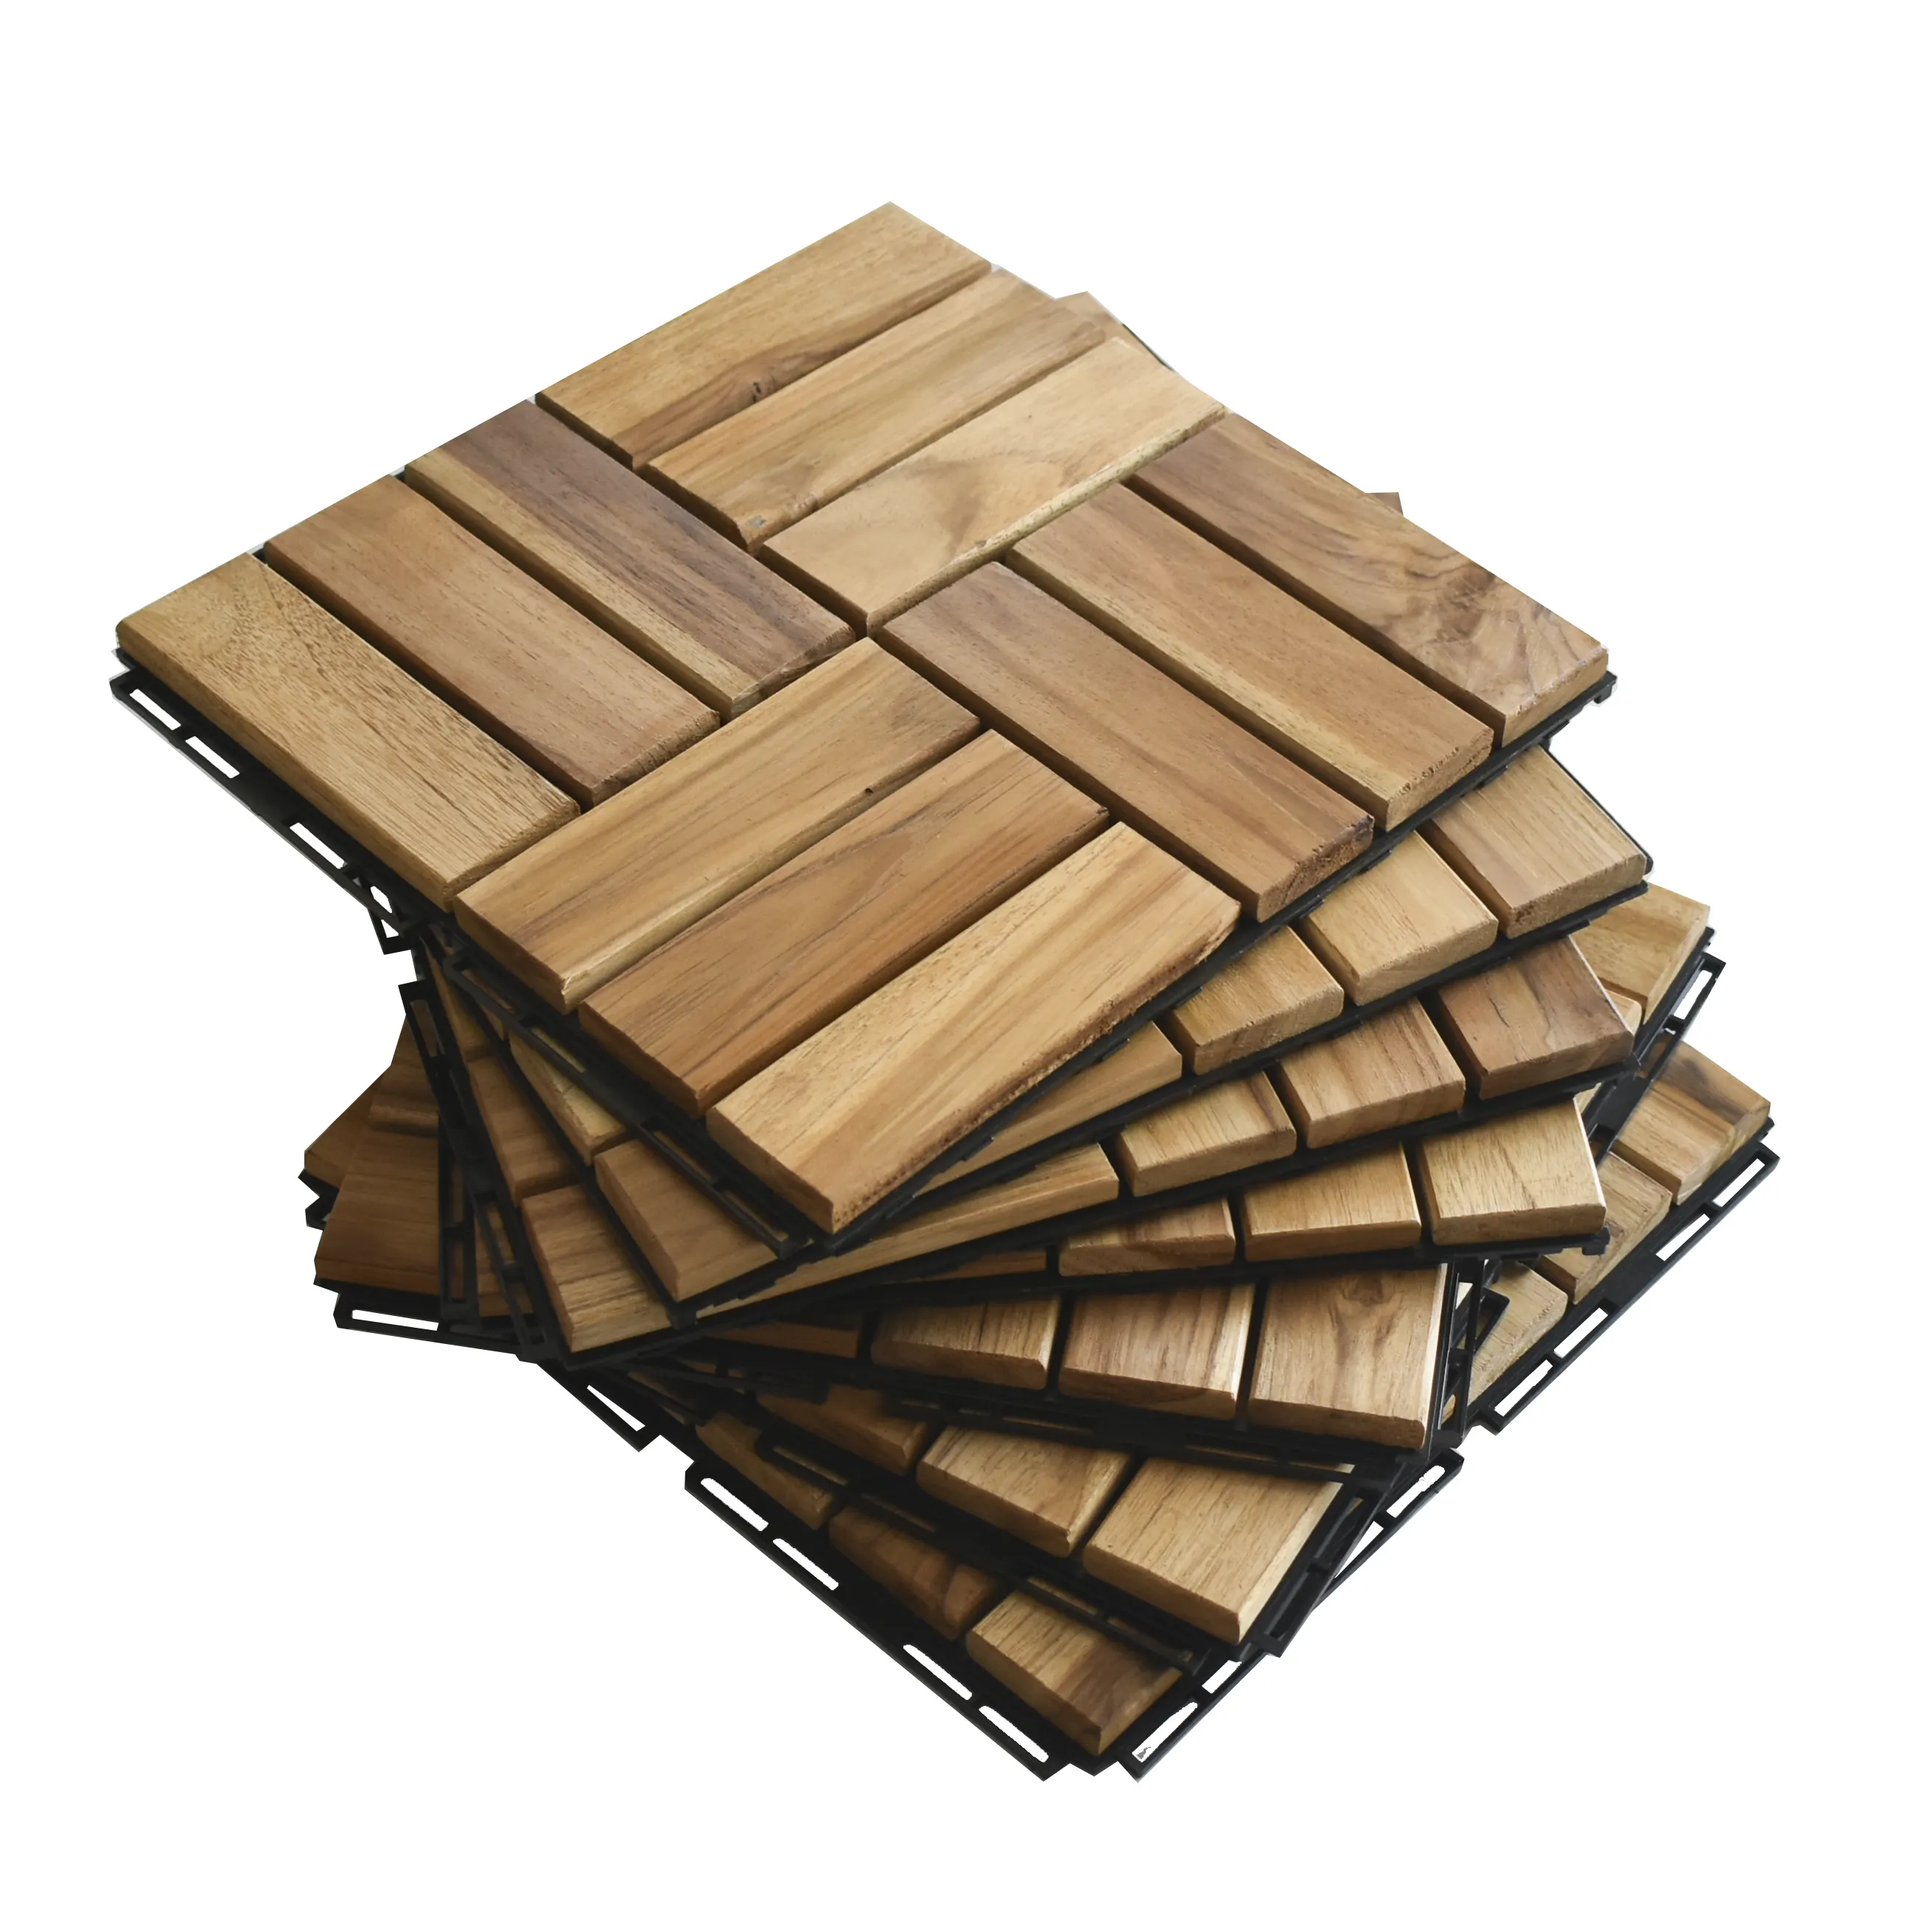 Acacia Wooden Decking Tiles With Plastic Base - Wood Interlocking Tiles For Floor Easy To Install